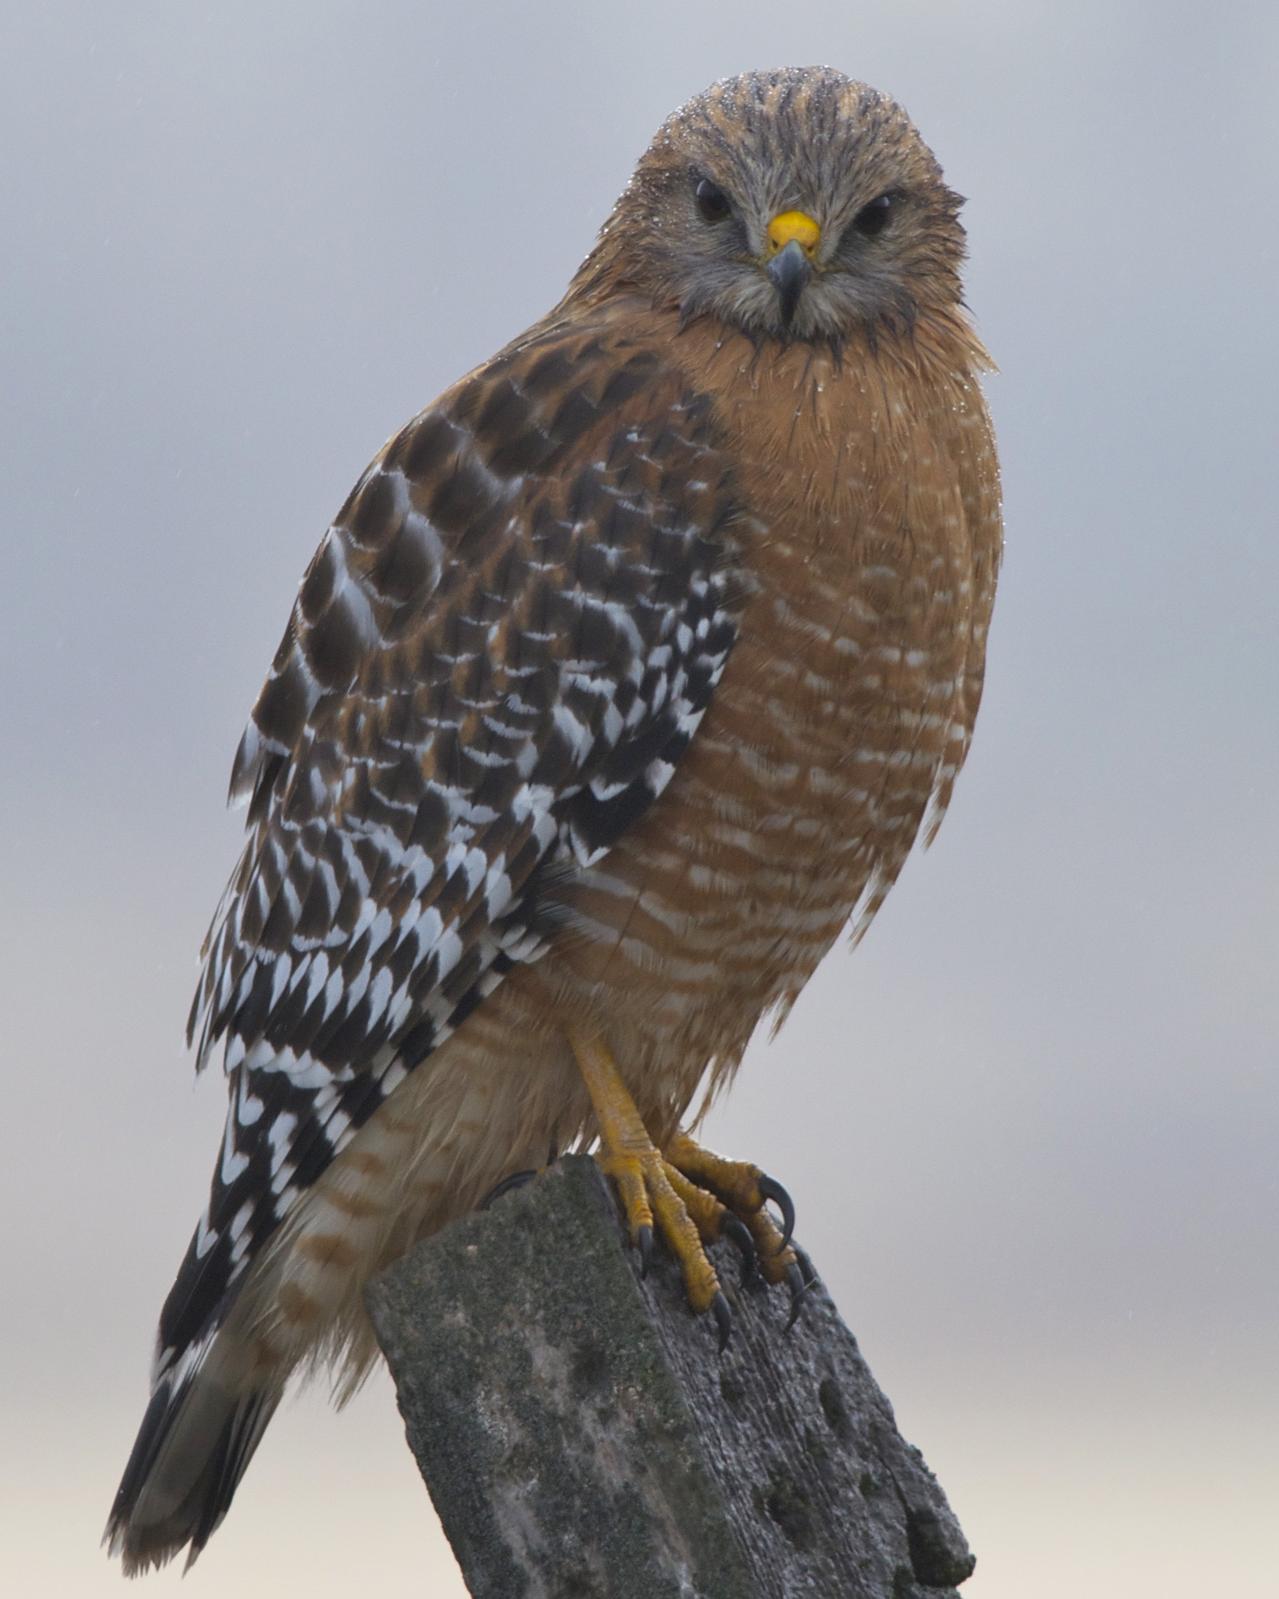 Red-shouldered Hawk Photo by Jonathan Bent